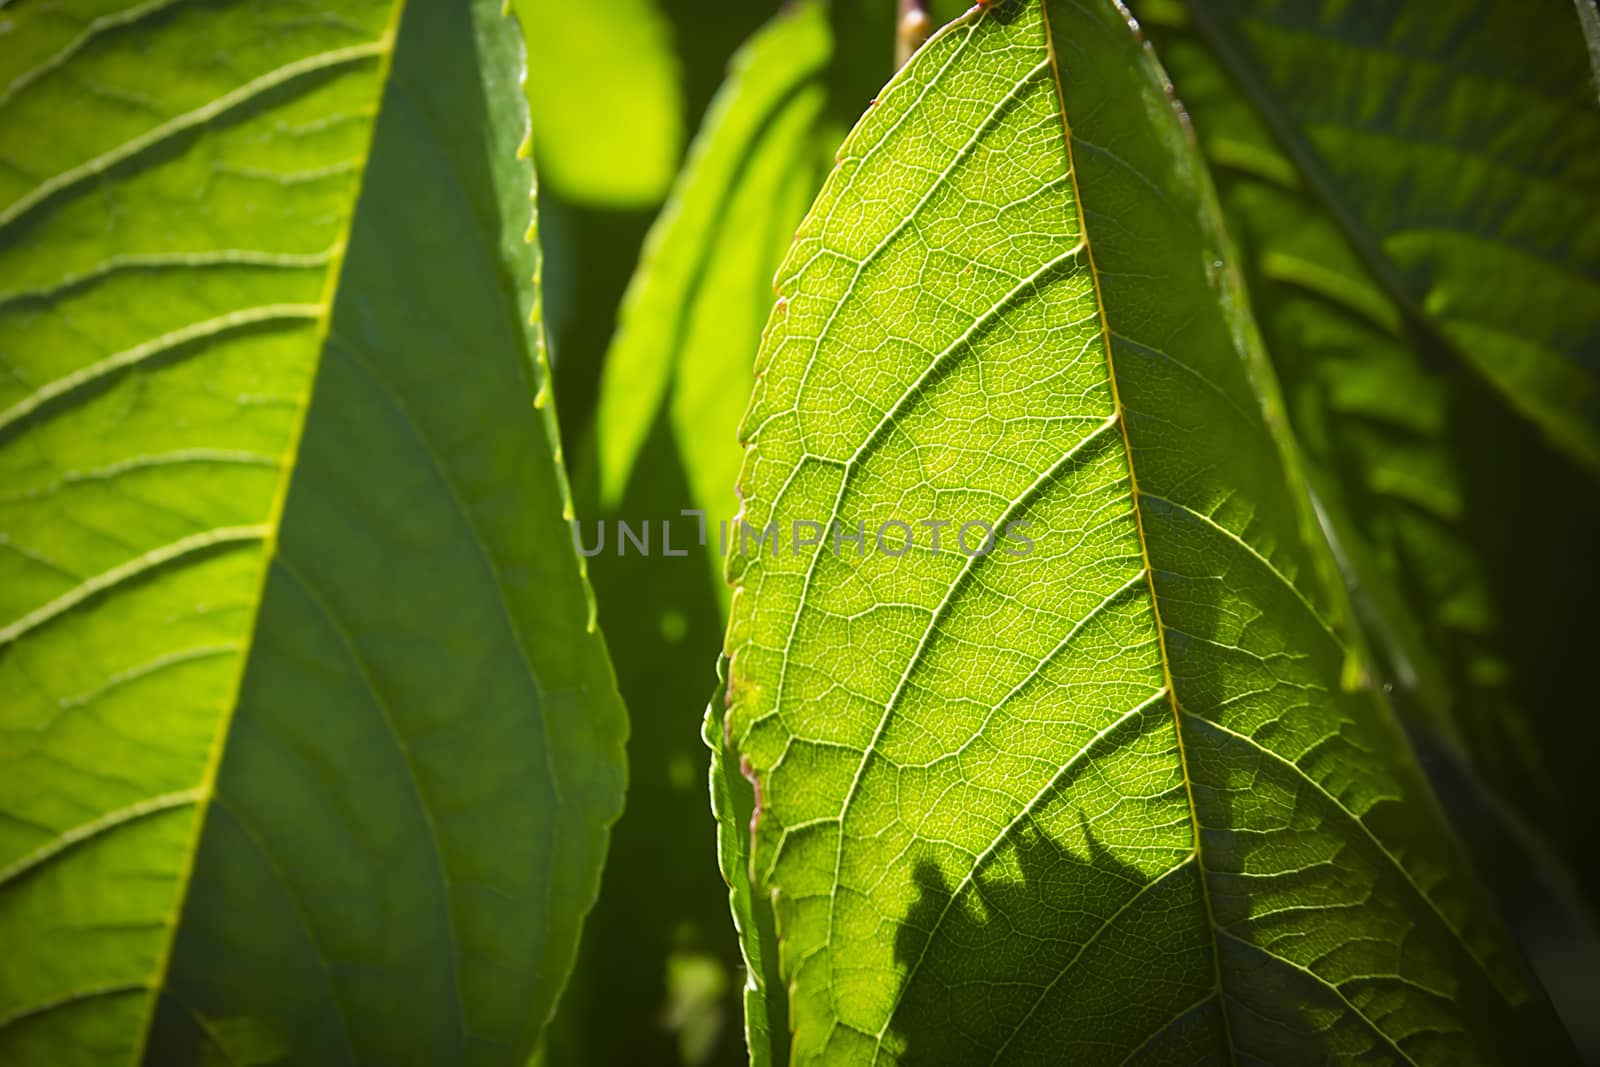 Bright green leaf, close-up natural outdoor background